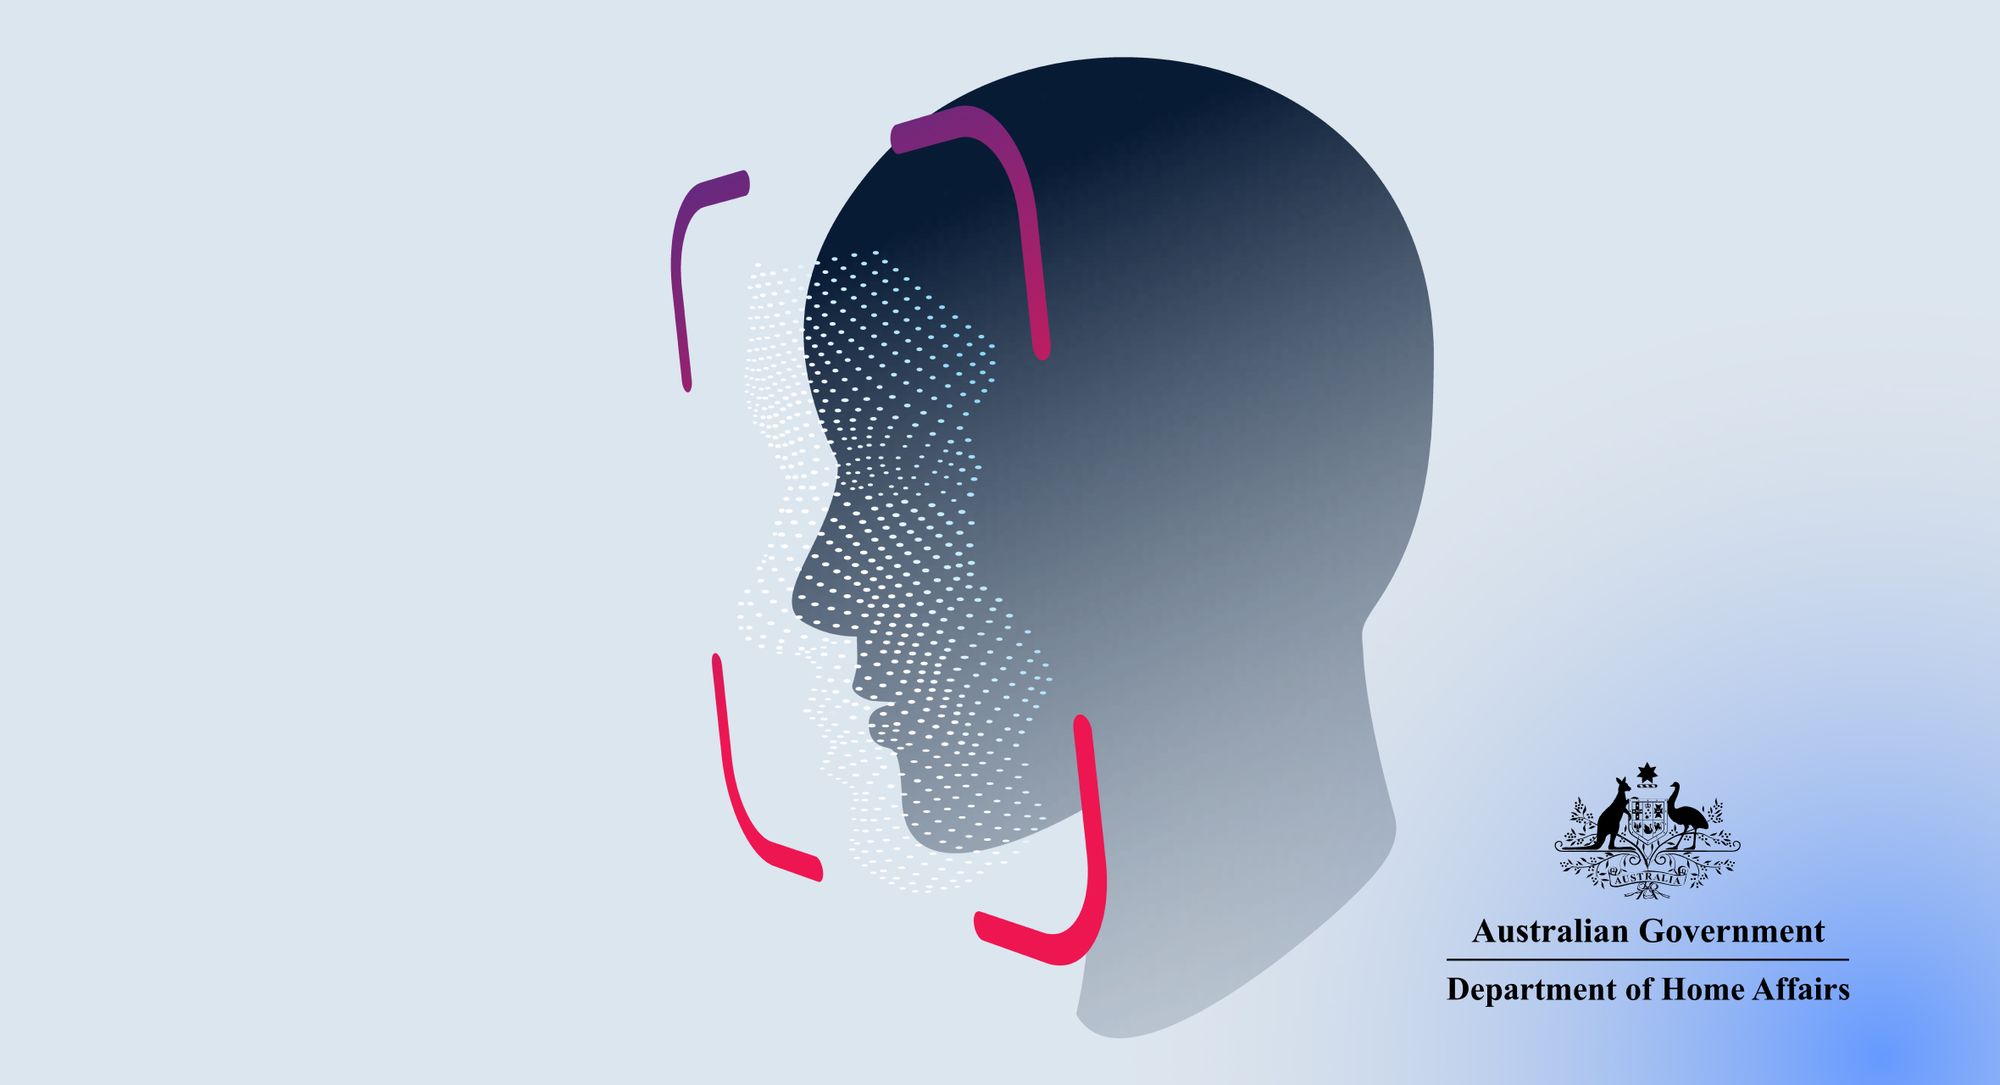 A high tech face recognition illustration